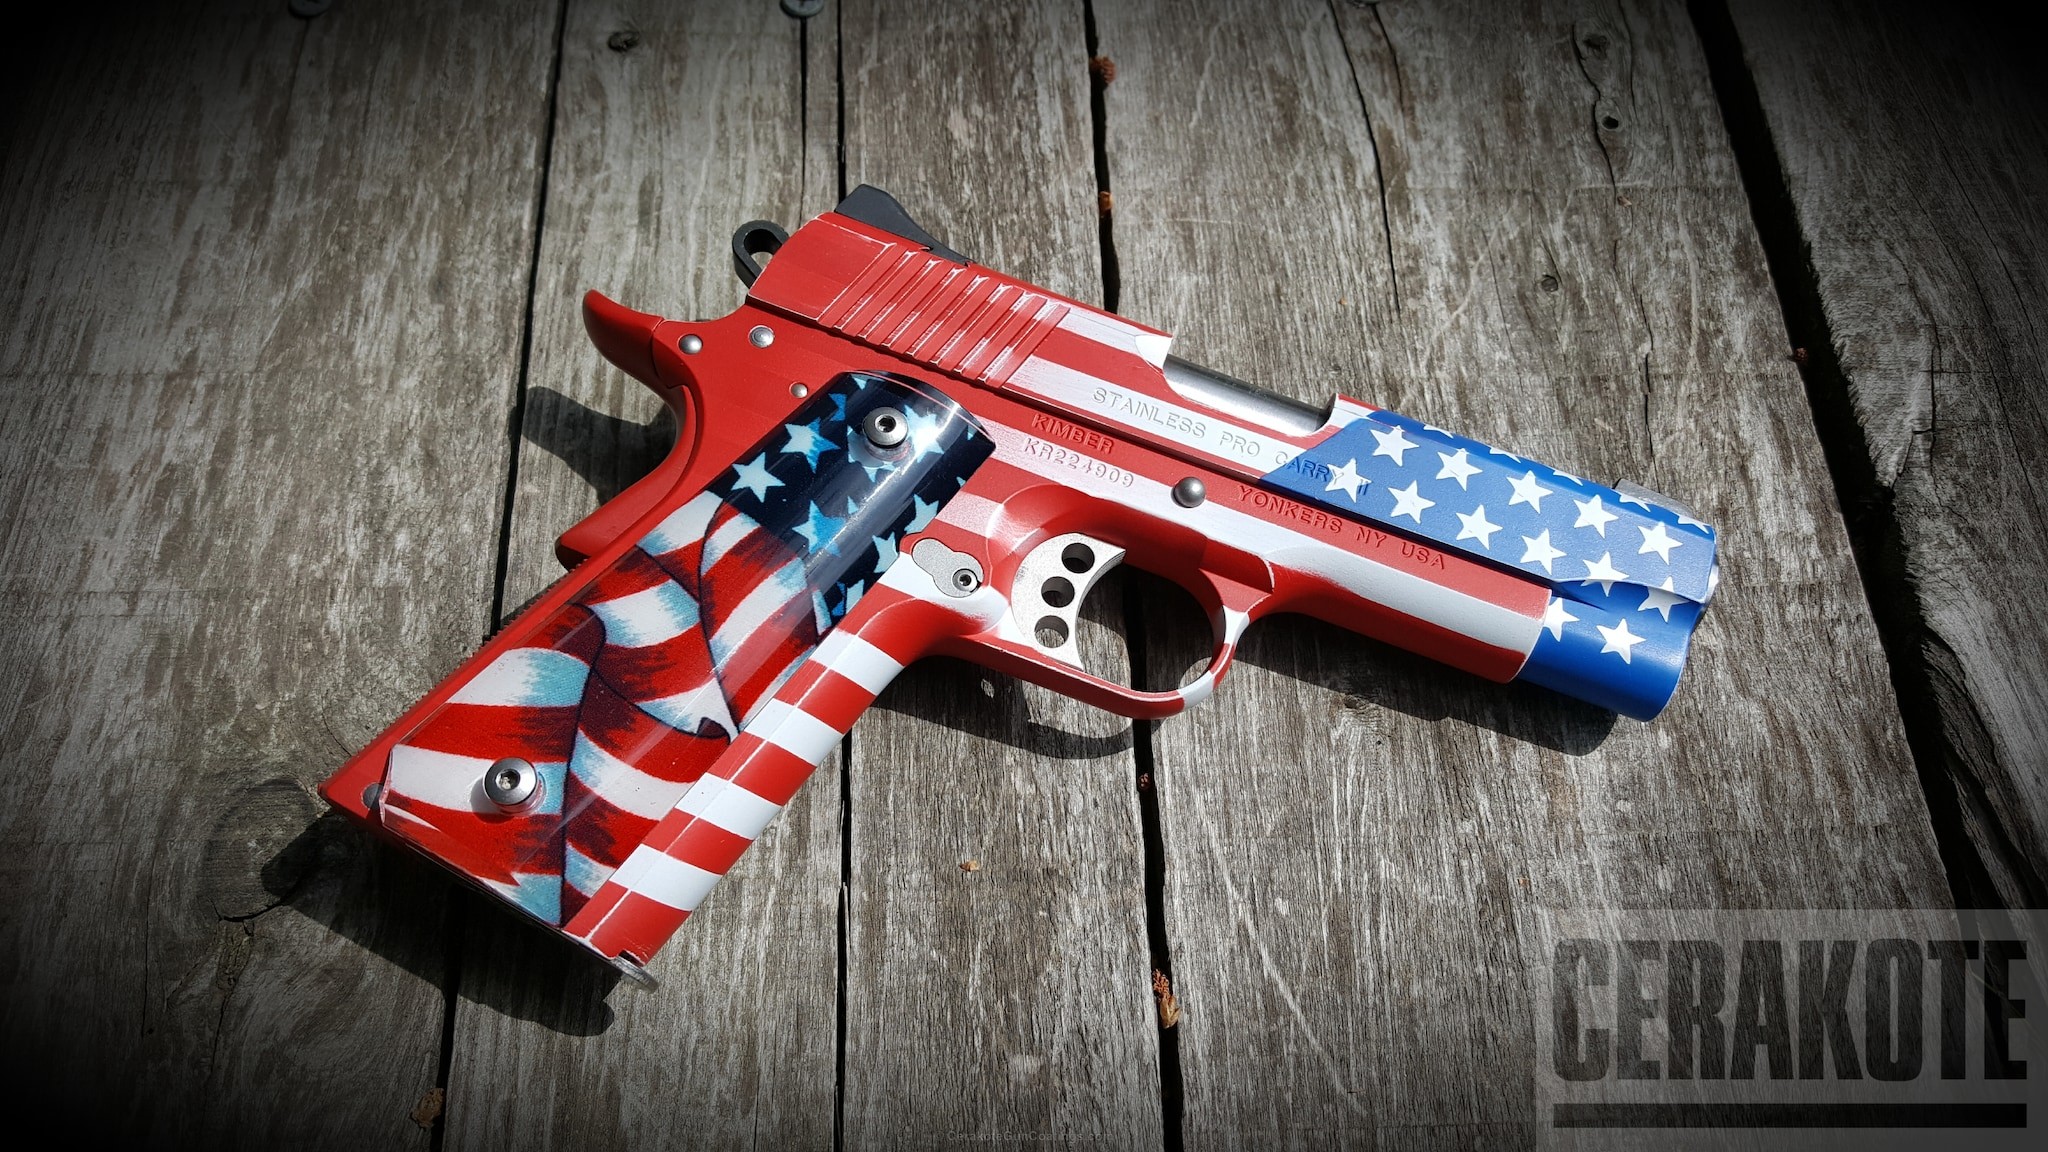 2048x1152 Big version of the 1st project picture. Kimber, American Flag, Pistol,  Kimber